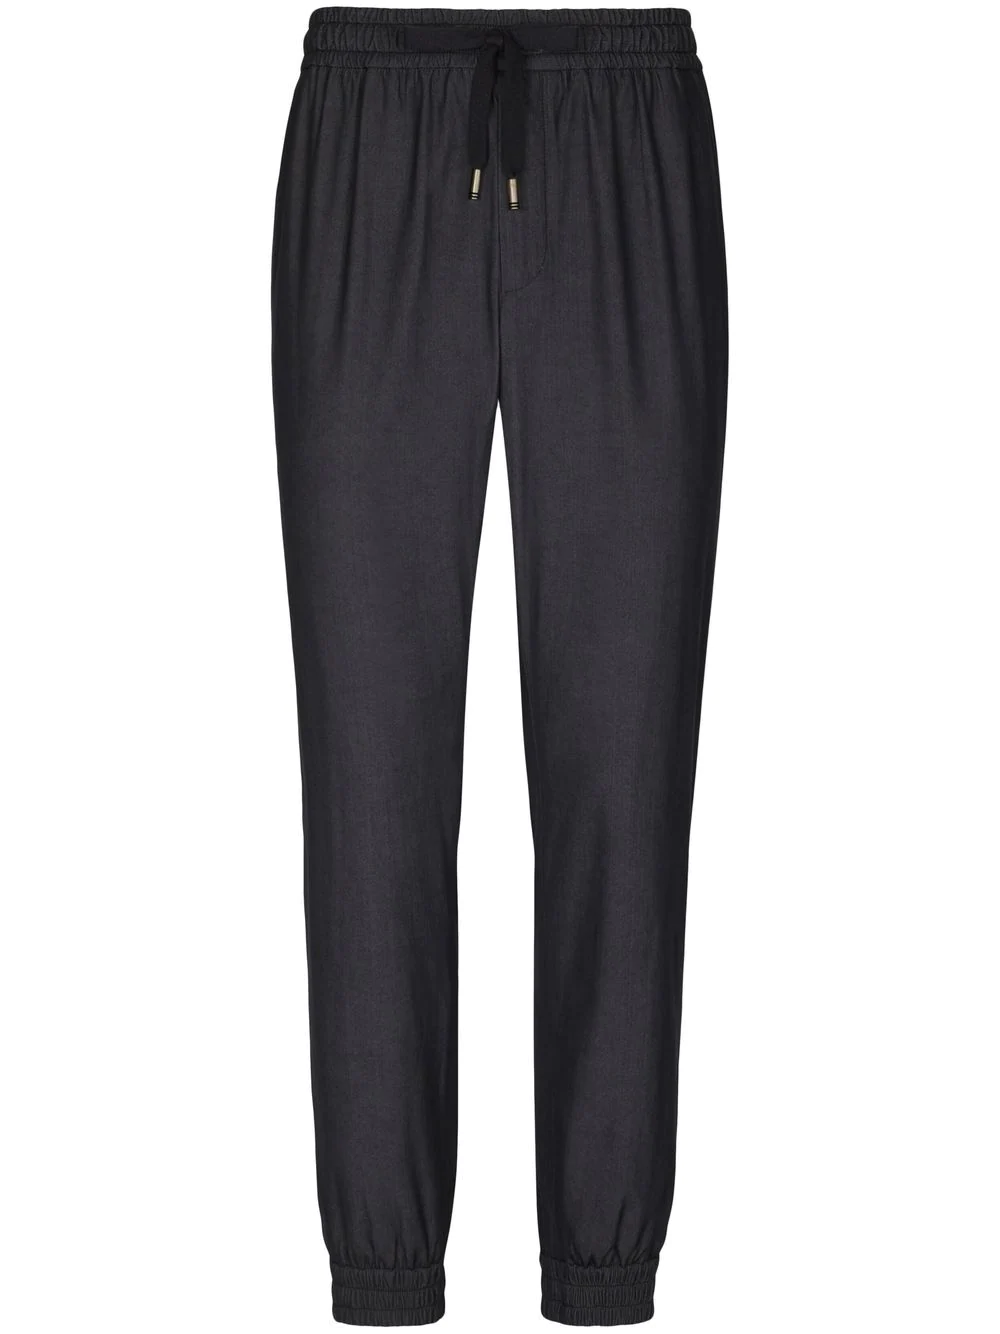 DOLCE & GABBANA TAPERED TRACK PANTS